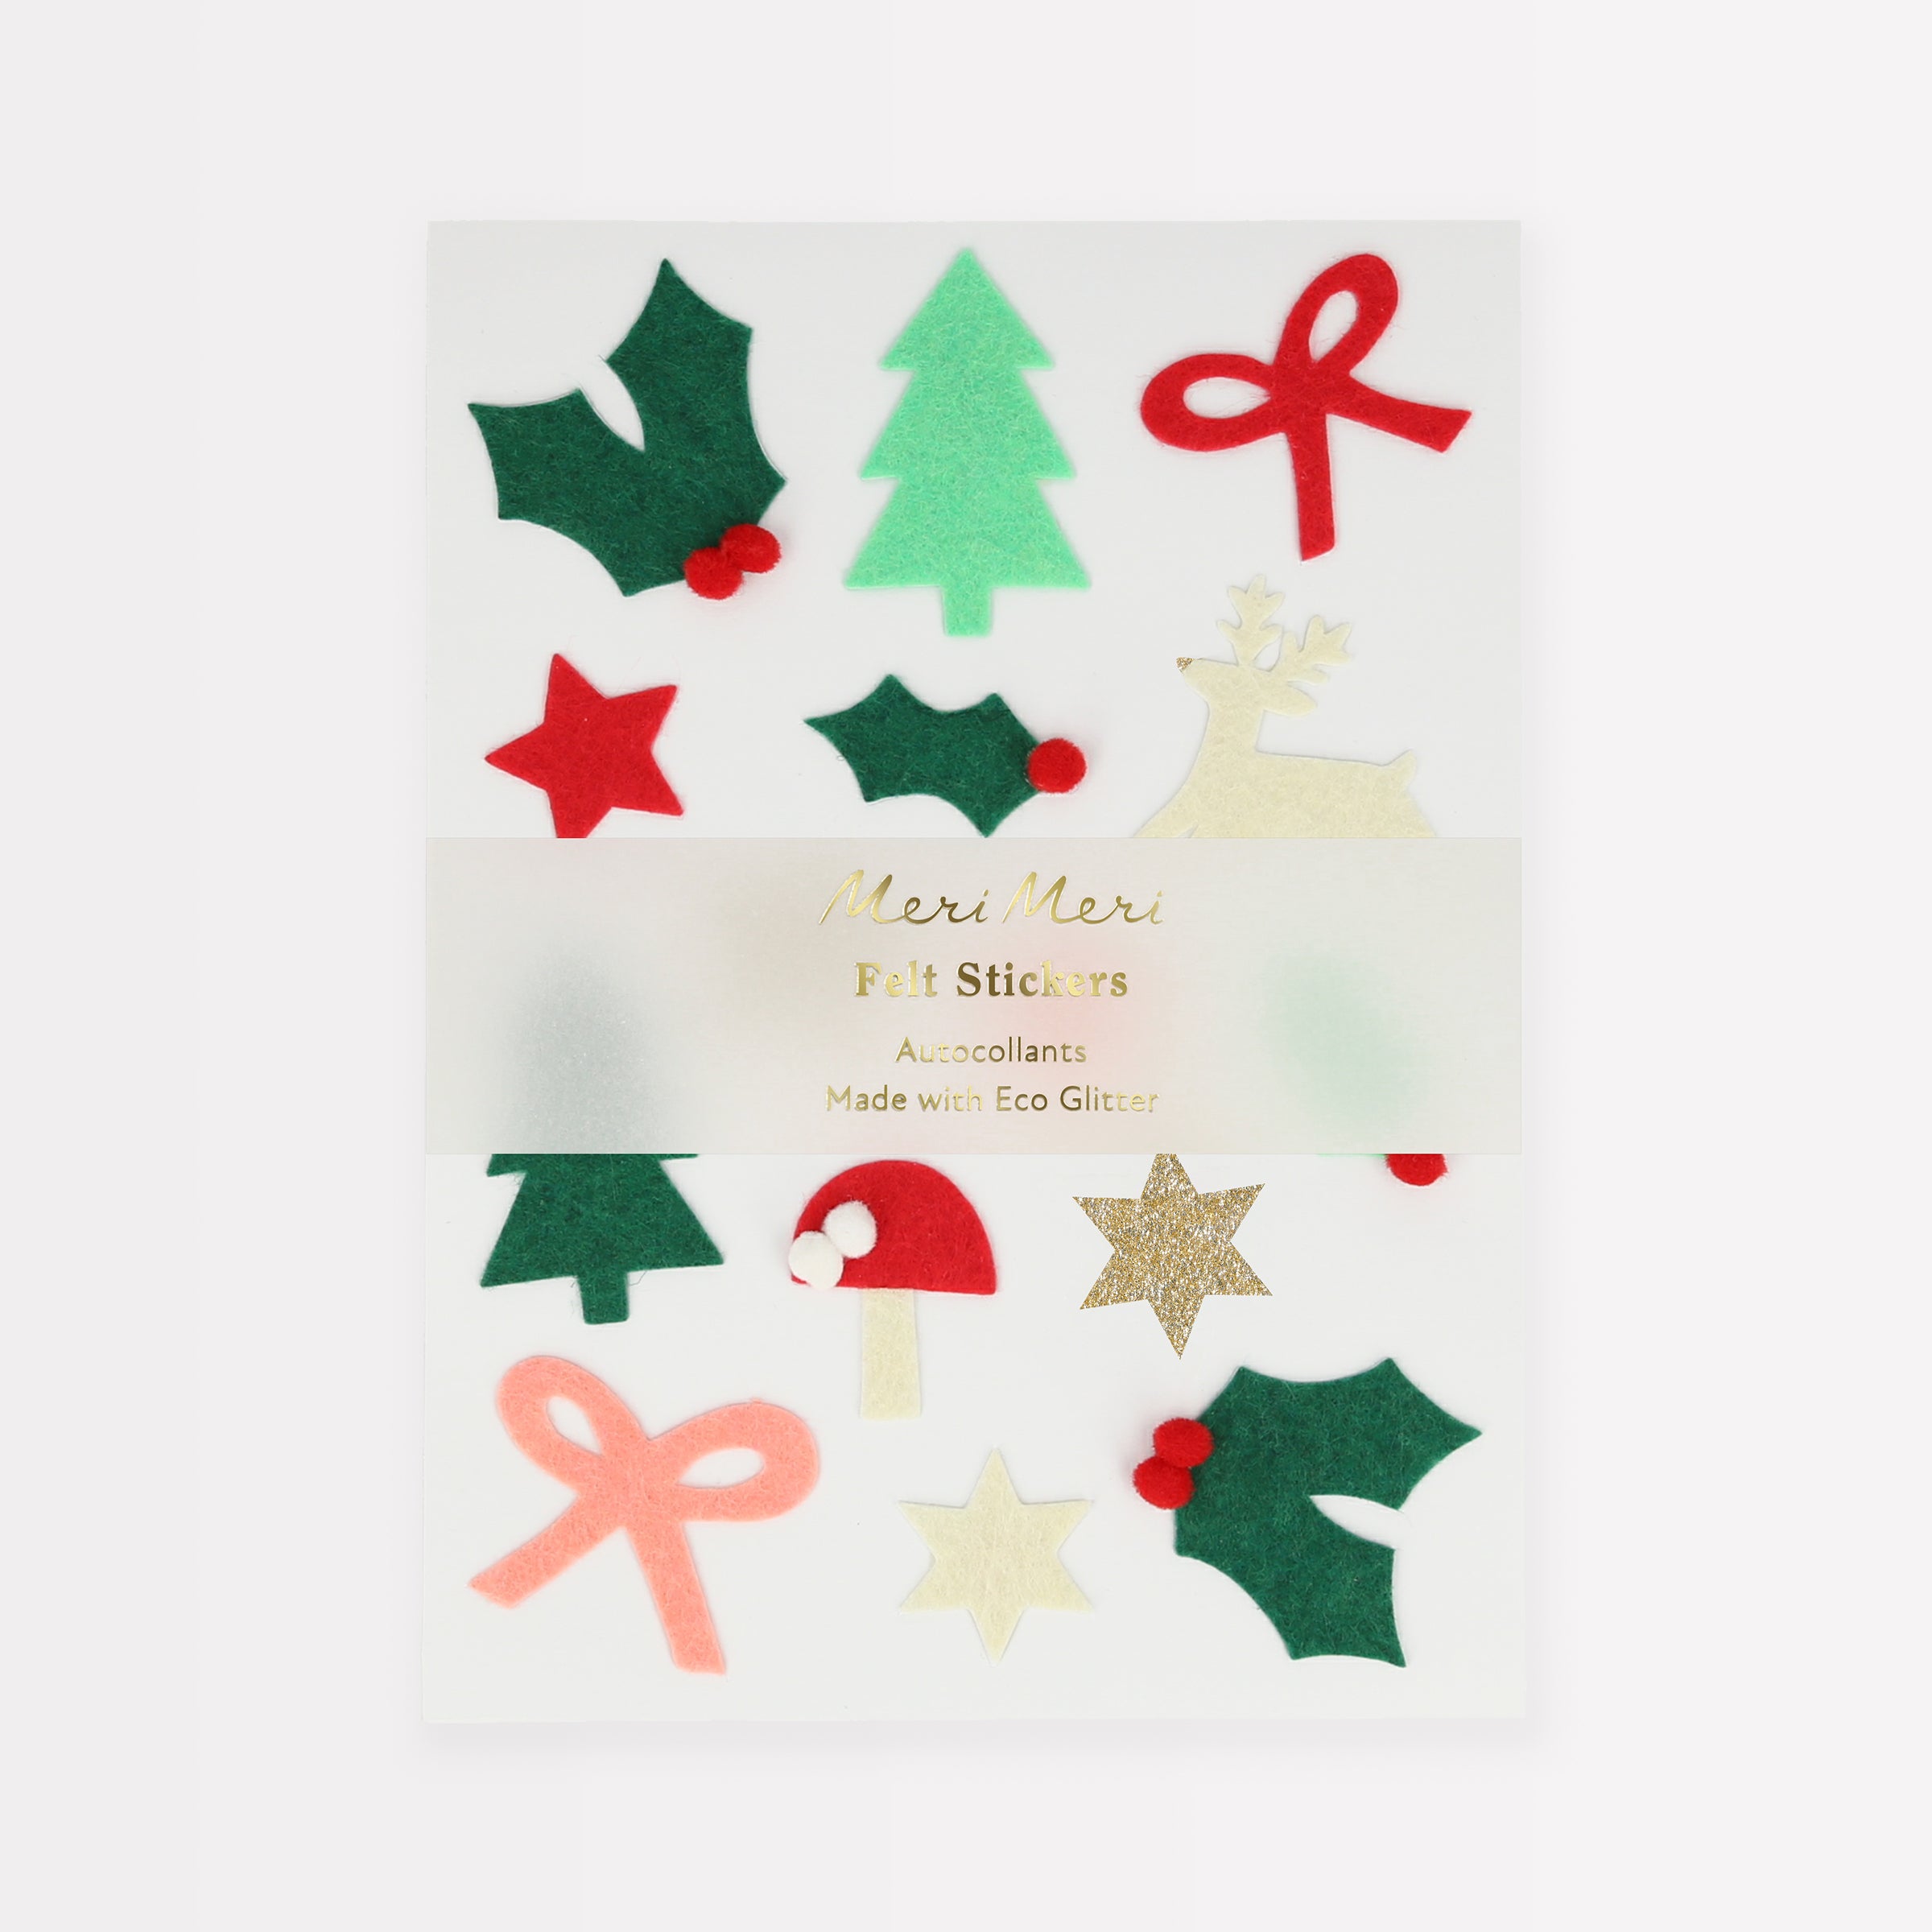 Our felt stickers include Christmas icons, and are perfect to as Christmas gift decorations.